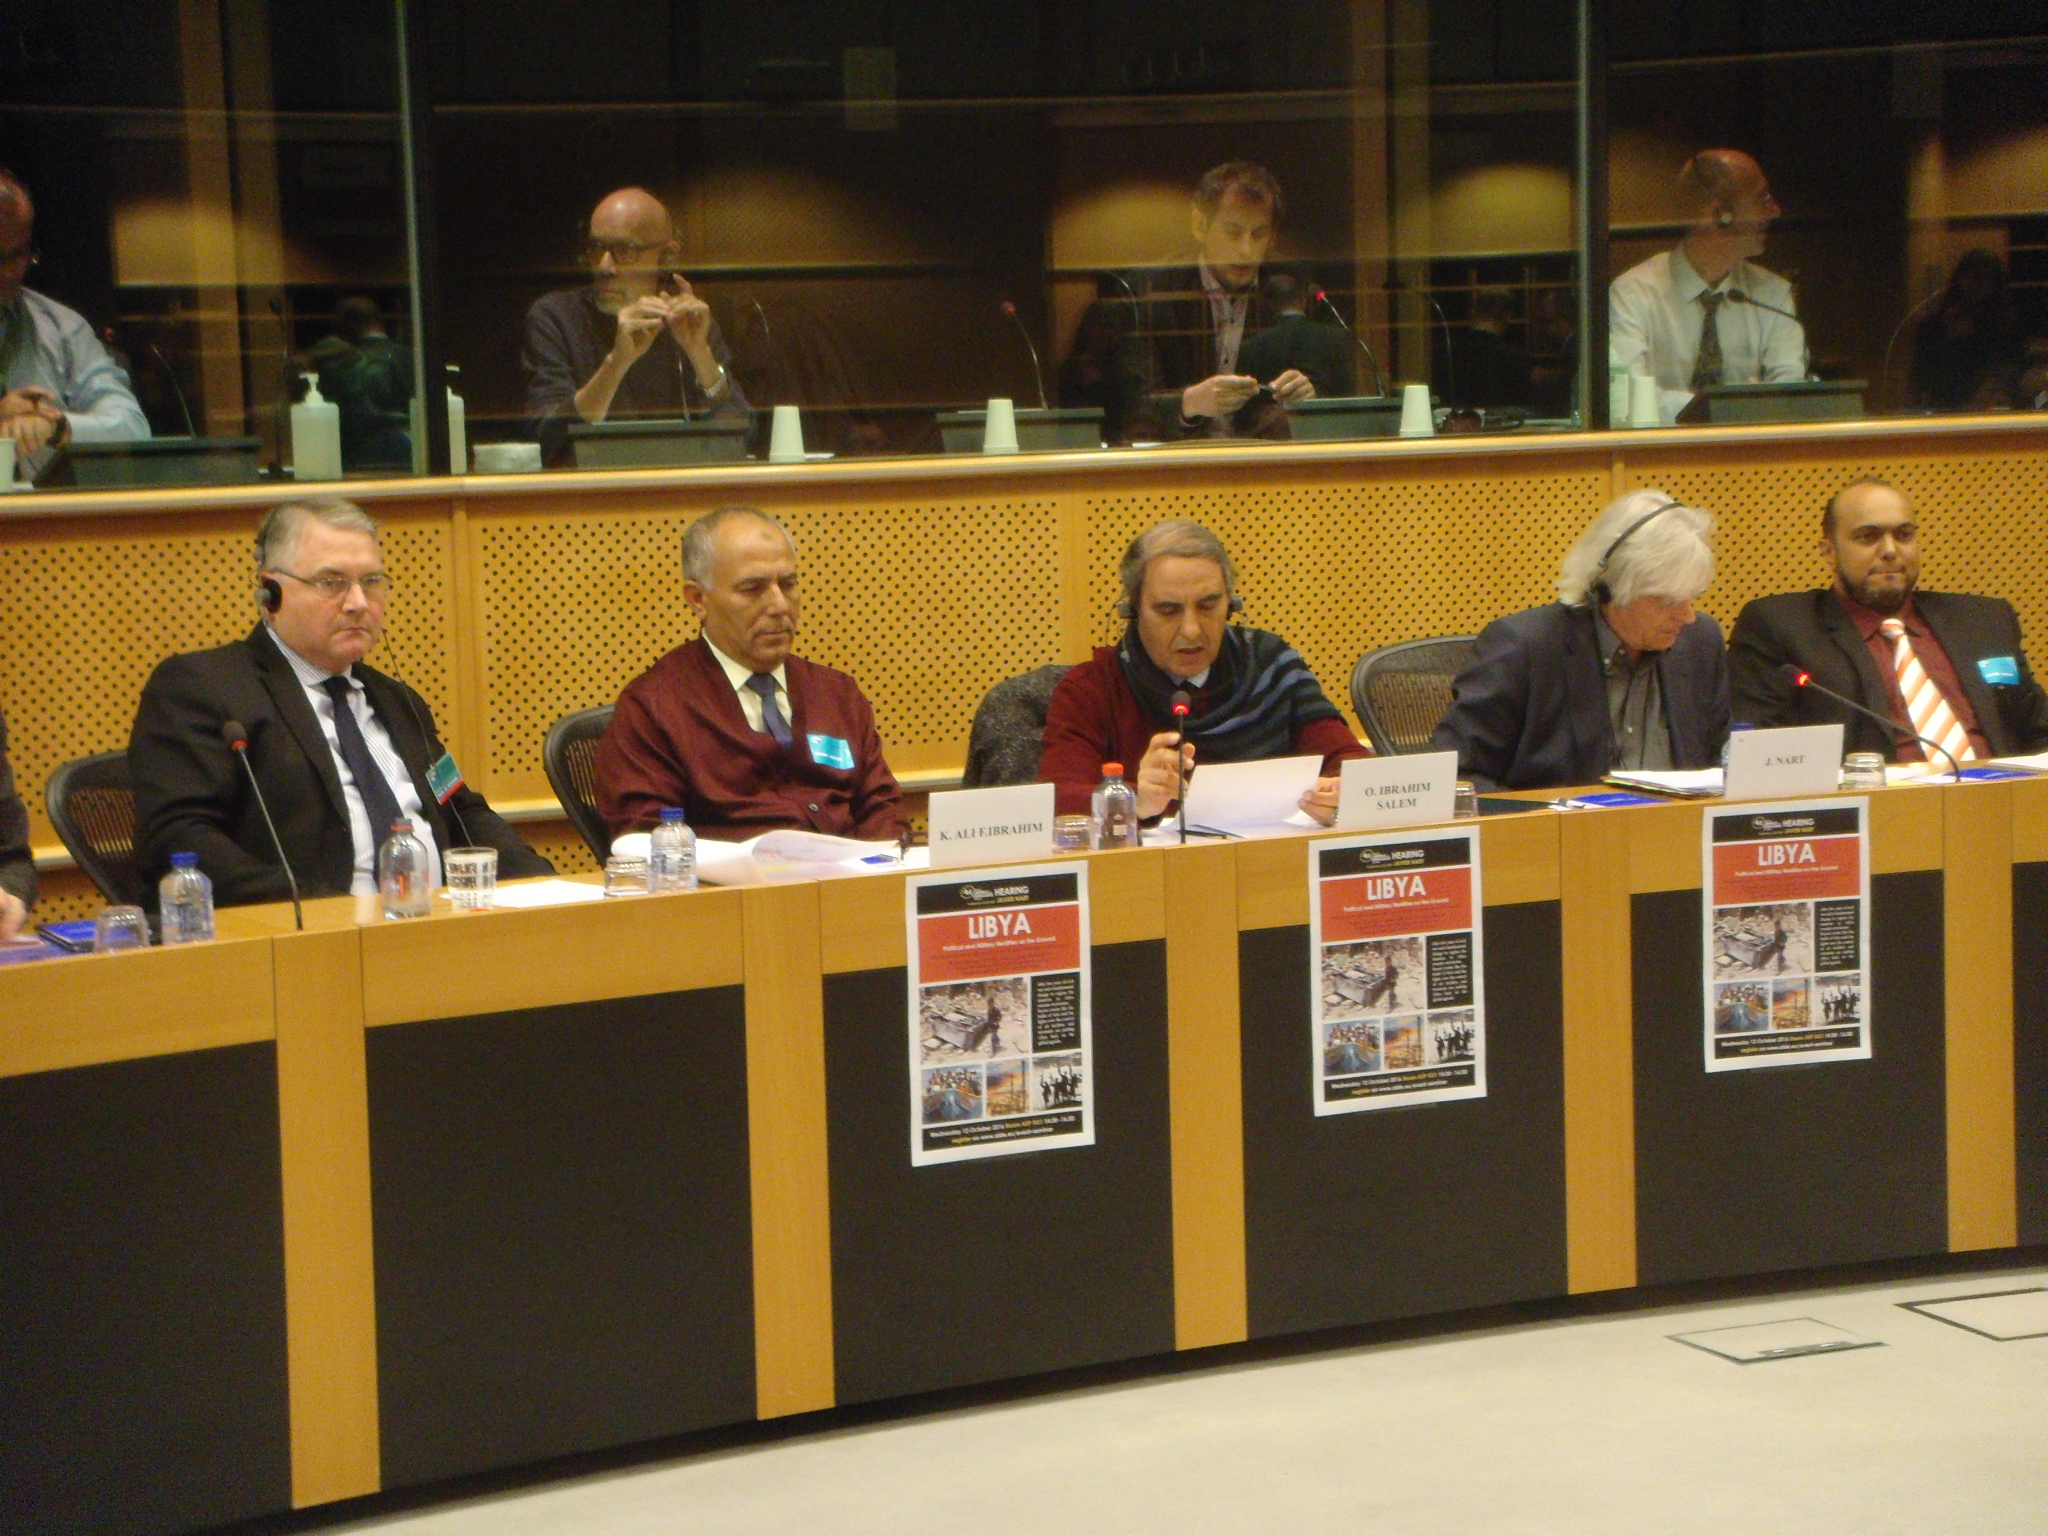 Three Libyan deputies from the parliament in Tobruk speaks at a conference in Brussels on the current situation in Libya